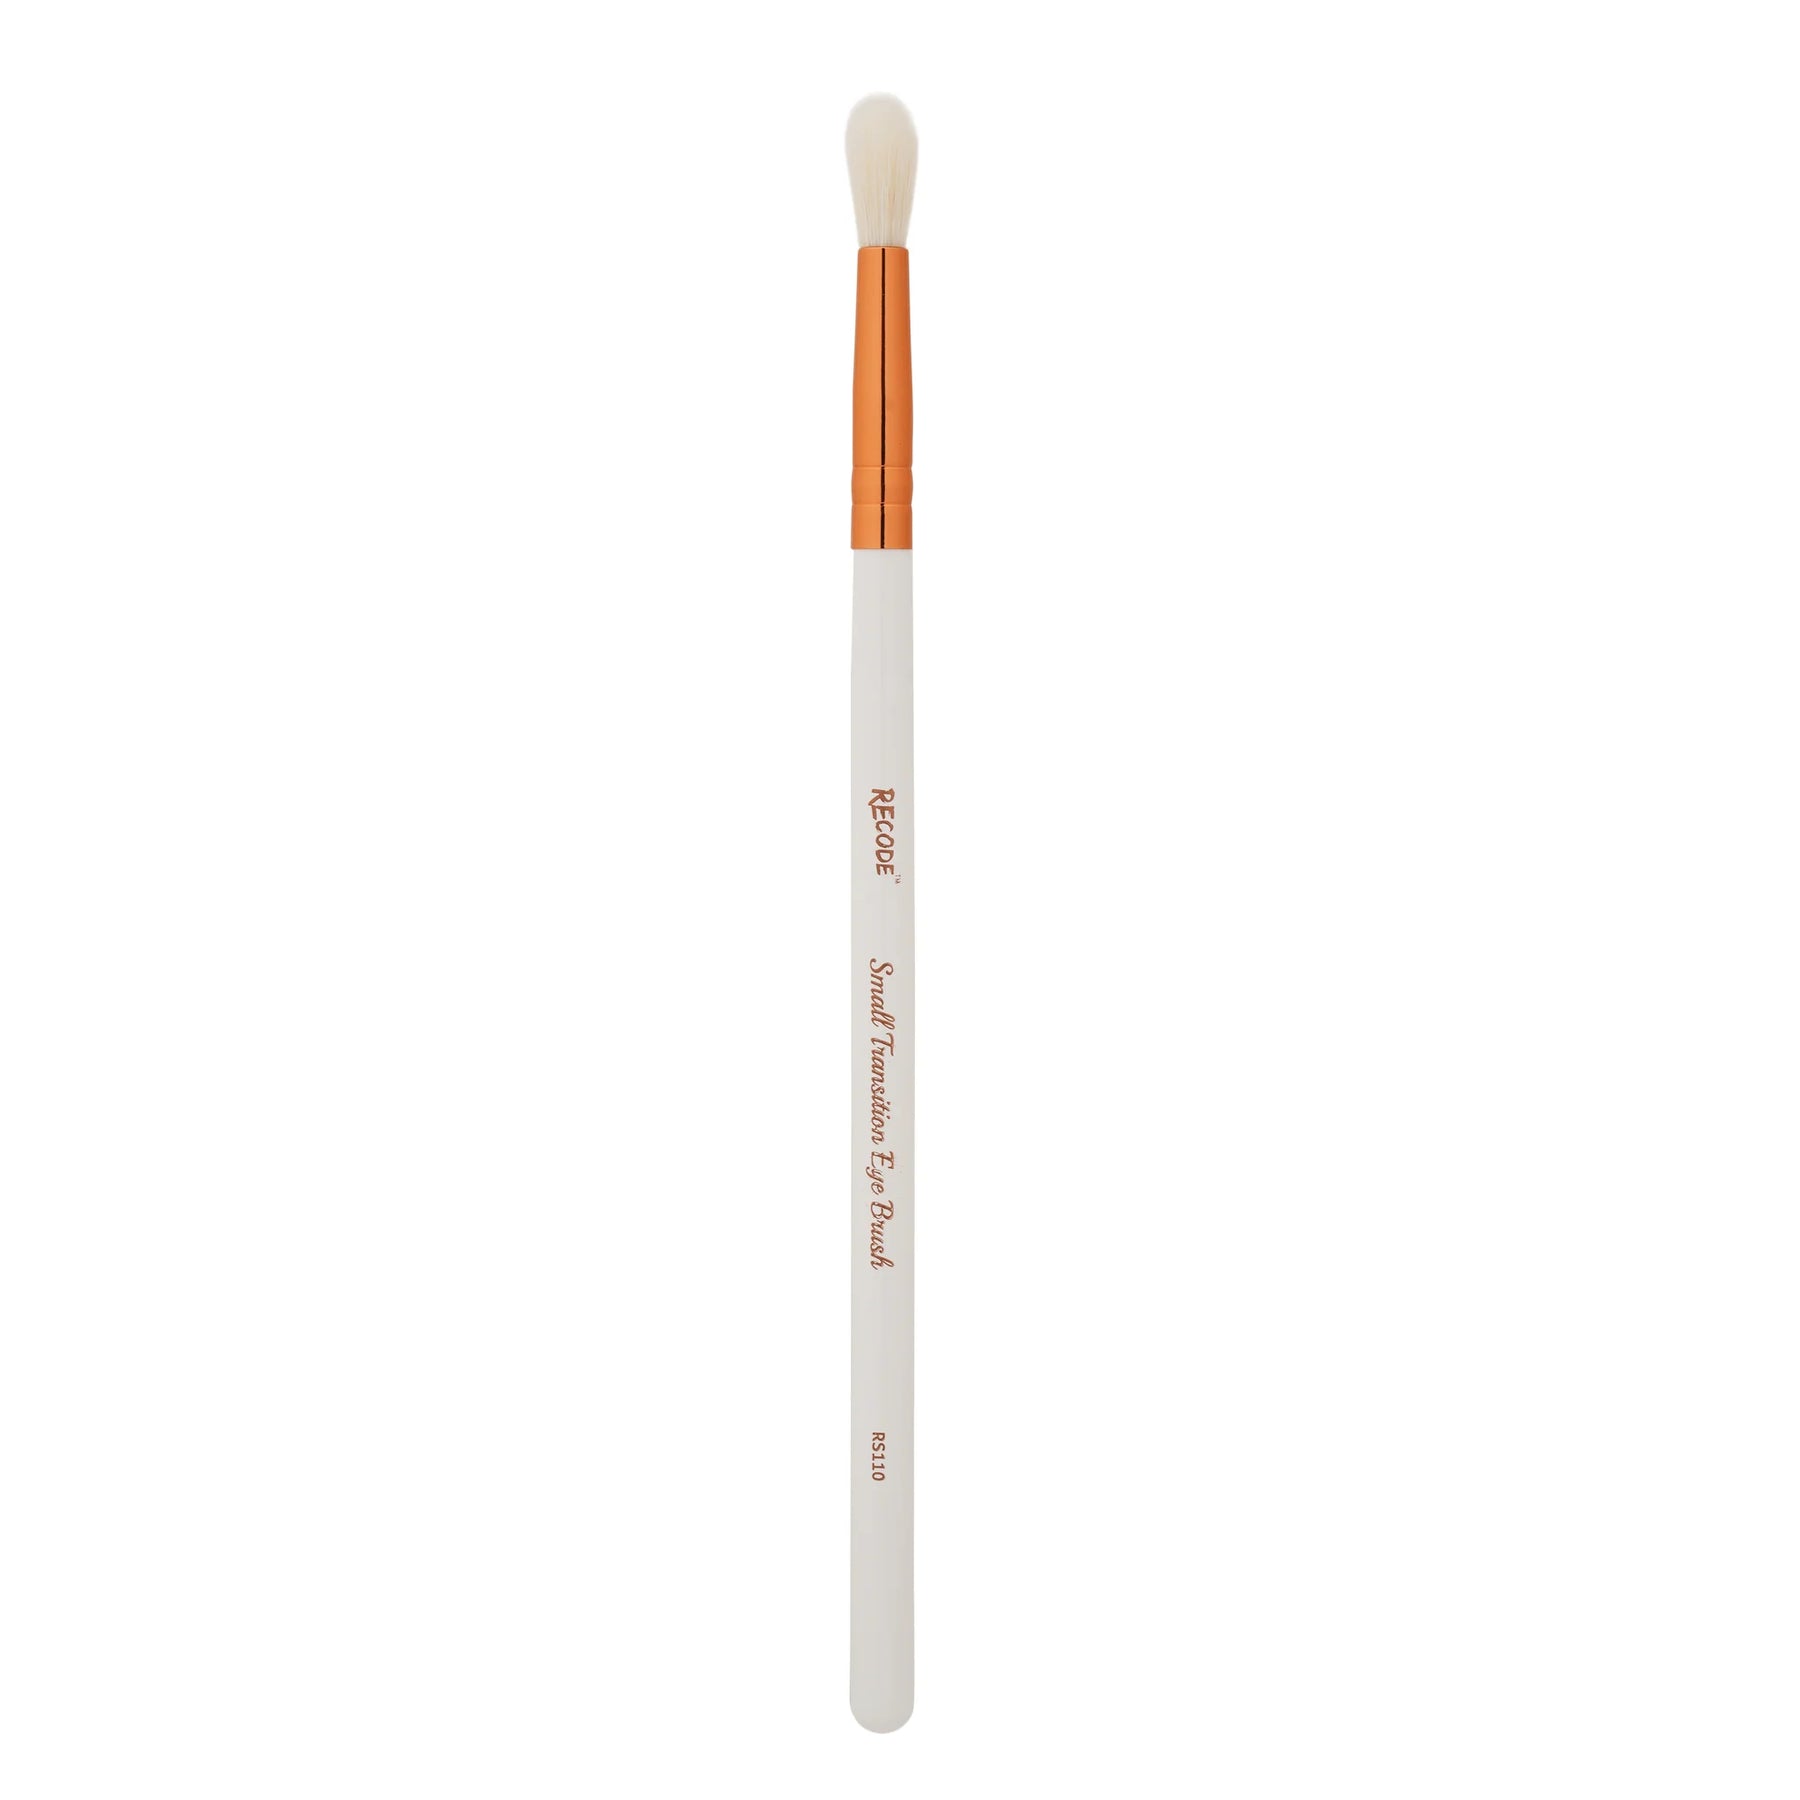 RECODE RS 110 SMALL TRANSITION EYE BRUSH